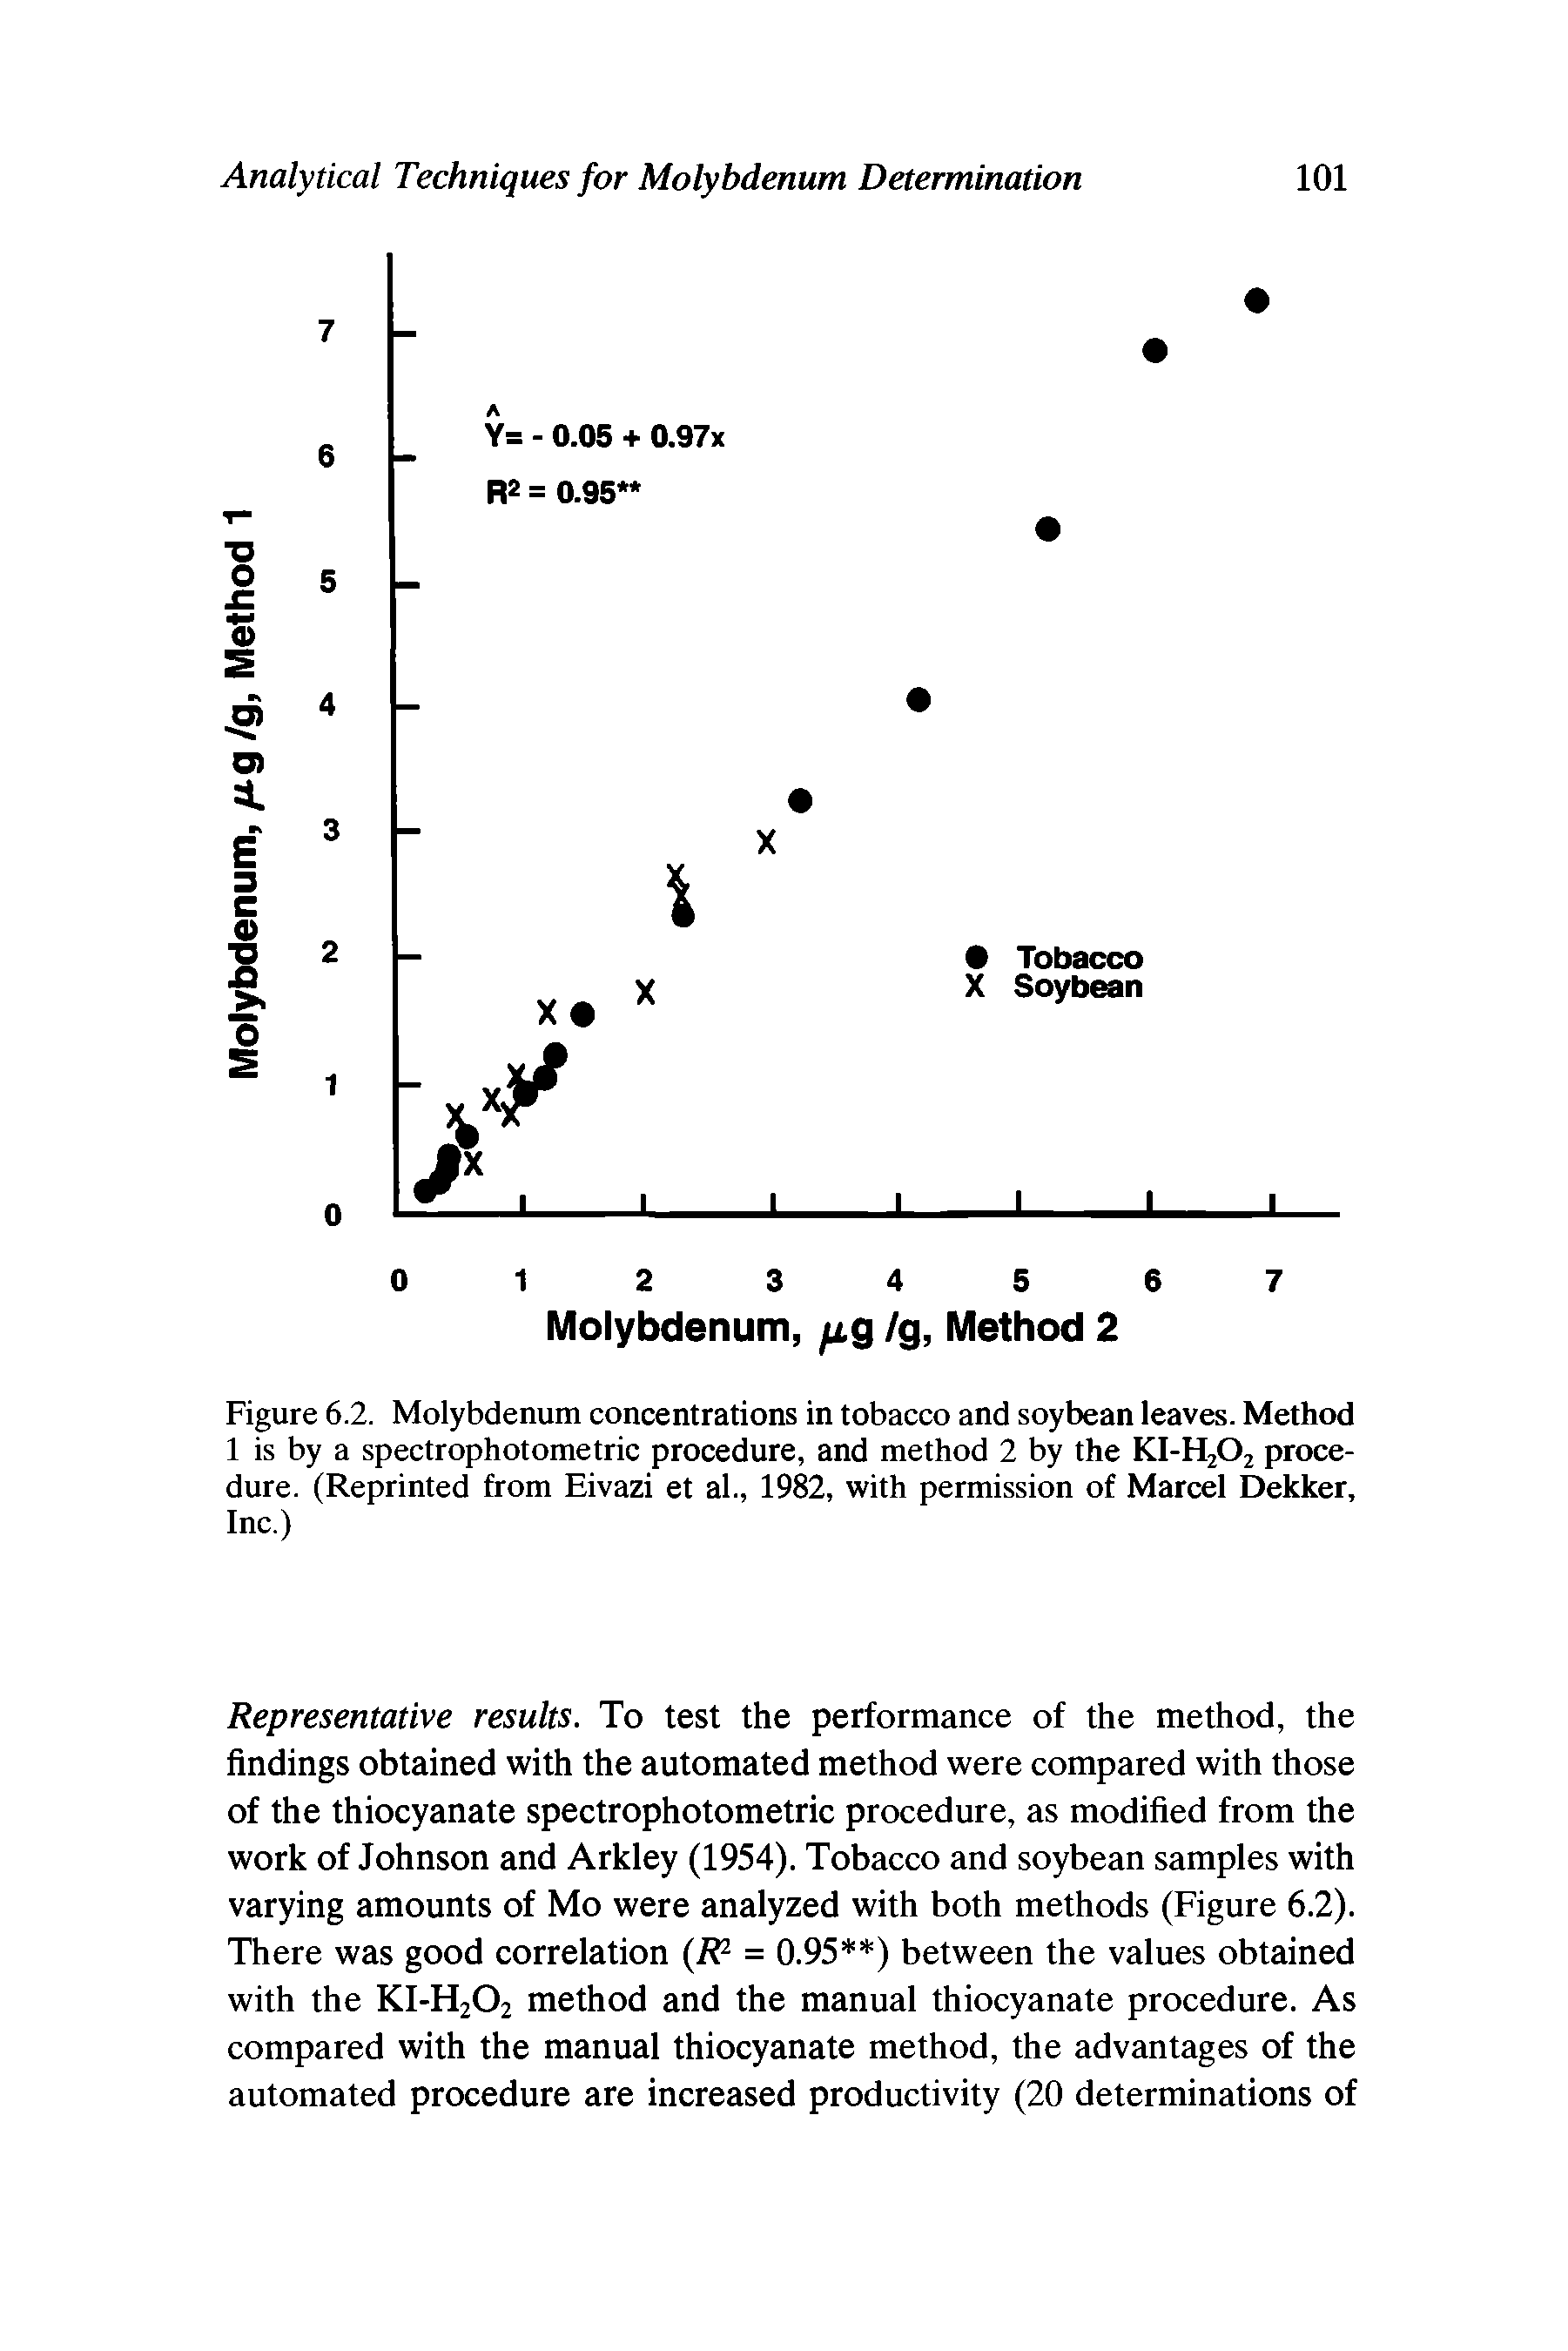 Figure 6.2. Molybdenum concentrations in tobacco and soybean leaves. Method 1 is by a spectrophotometric procedure, and method 2 by the KI-H2O2 procedure. (Reprinted from Eivazi et al., 1982, with permission of Marcel Dekker, Inc.)...